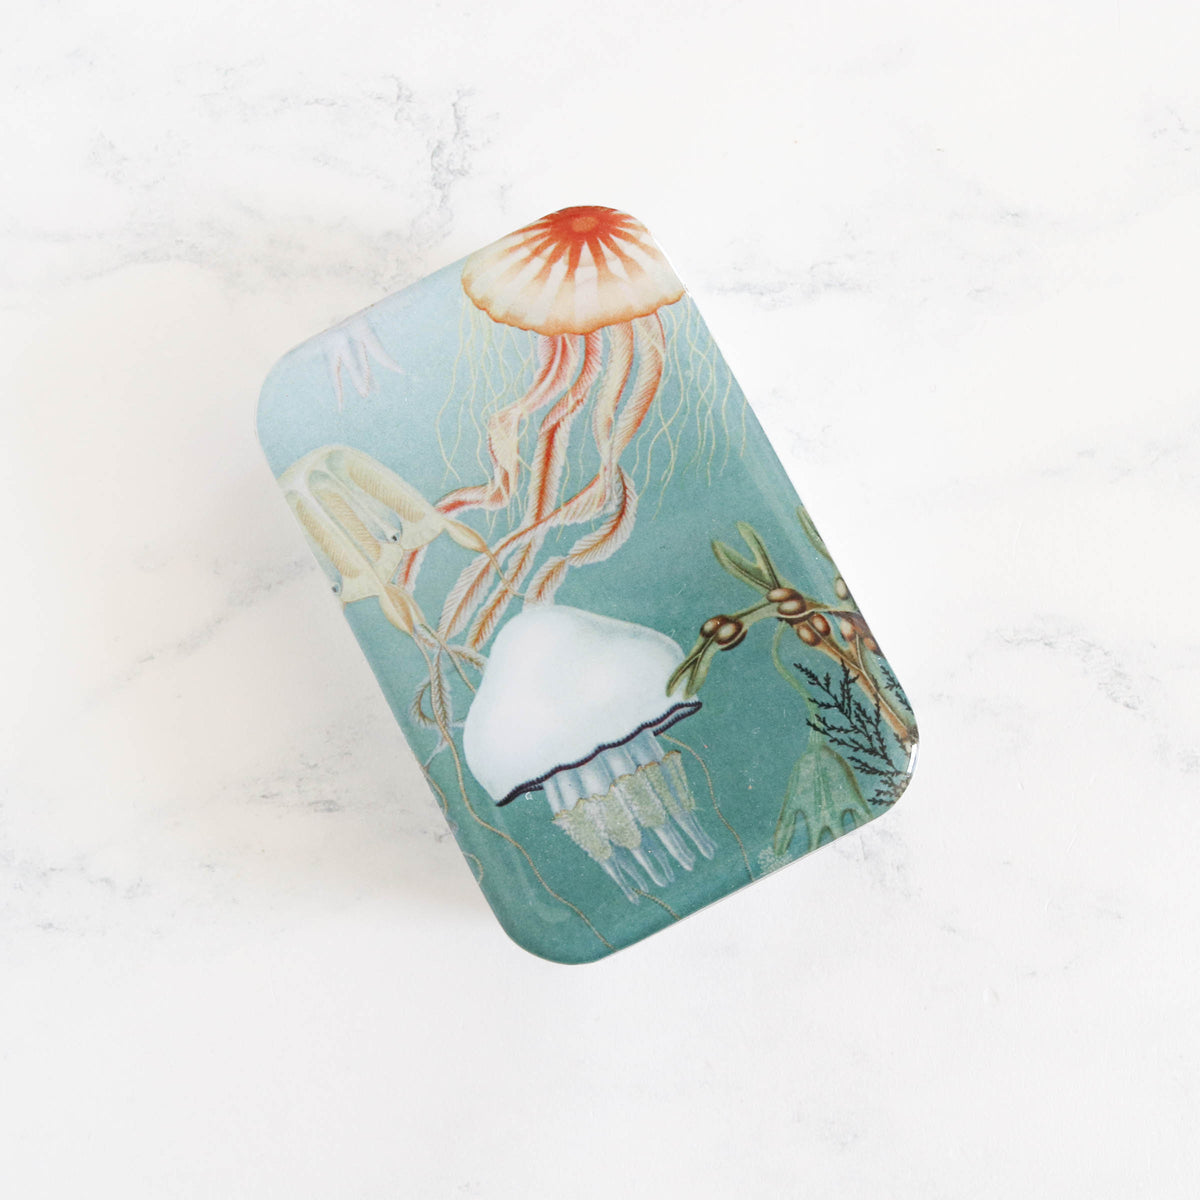 Vintage-Inspired Storage and Notions Tins - Jellyfish